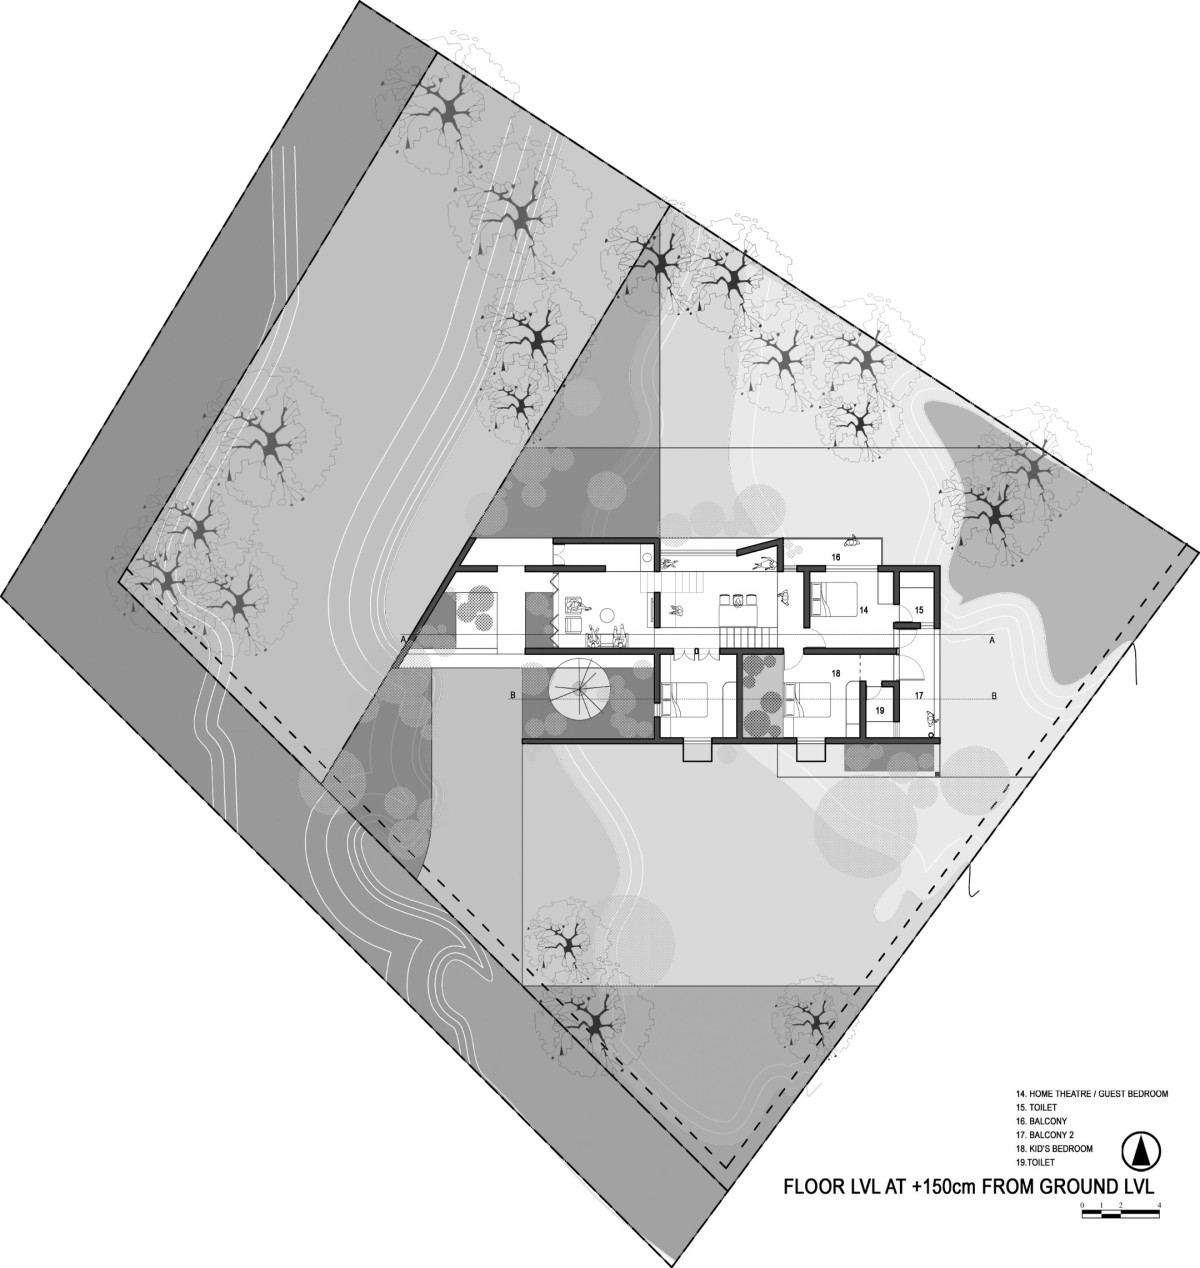 Level 2 plan of Bay Leaf House by Project 51 A (h)